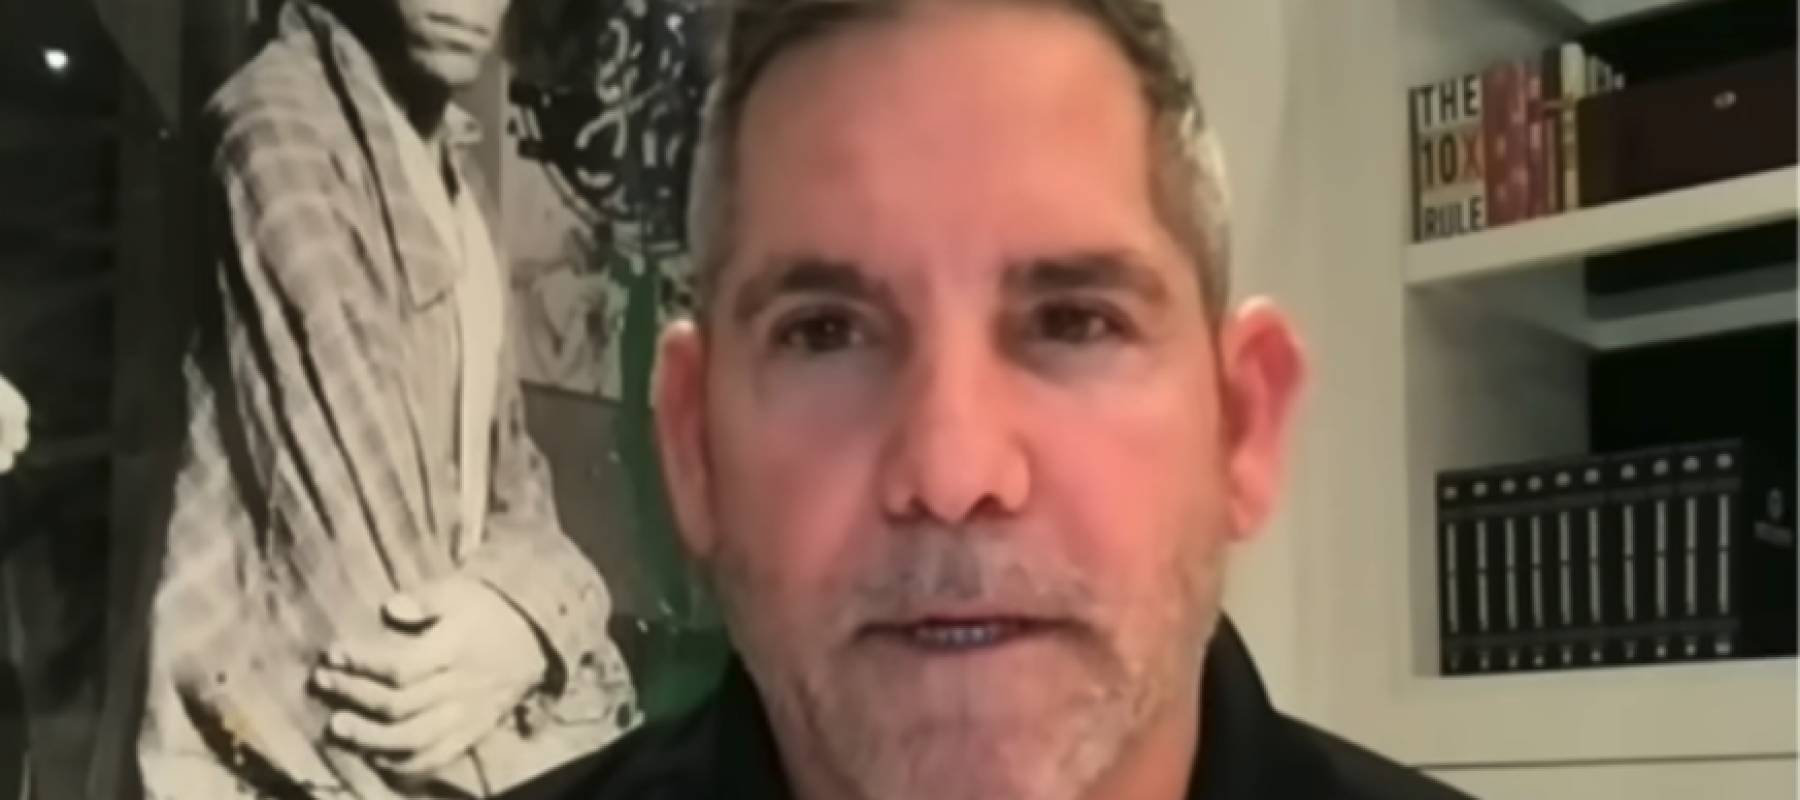 Grant Cardone in his home office, speaking directly to the camera.